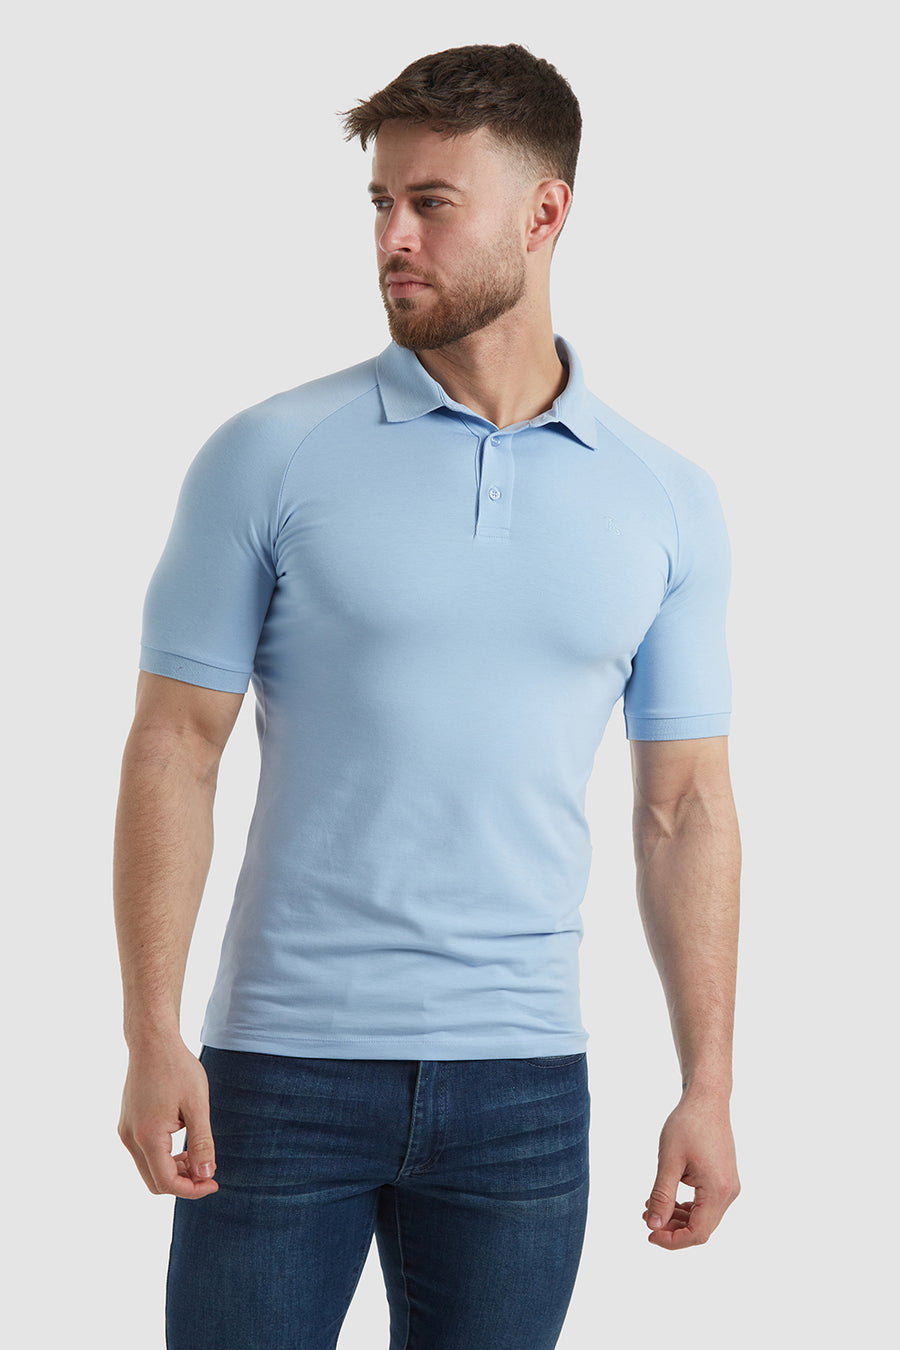 Athletic Fit Polo Shirt in Soft Blue - TAILORED ATHLETE - USA